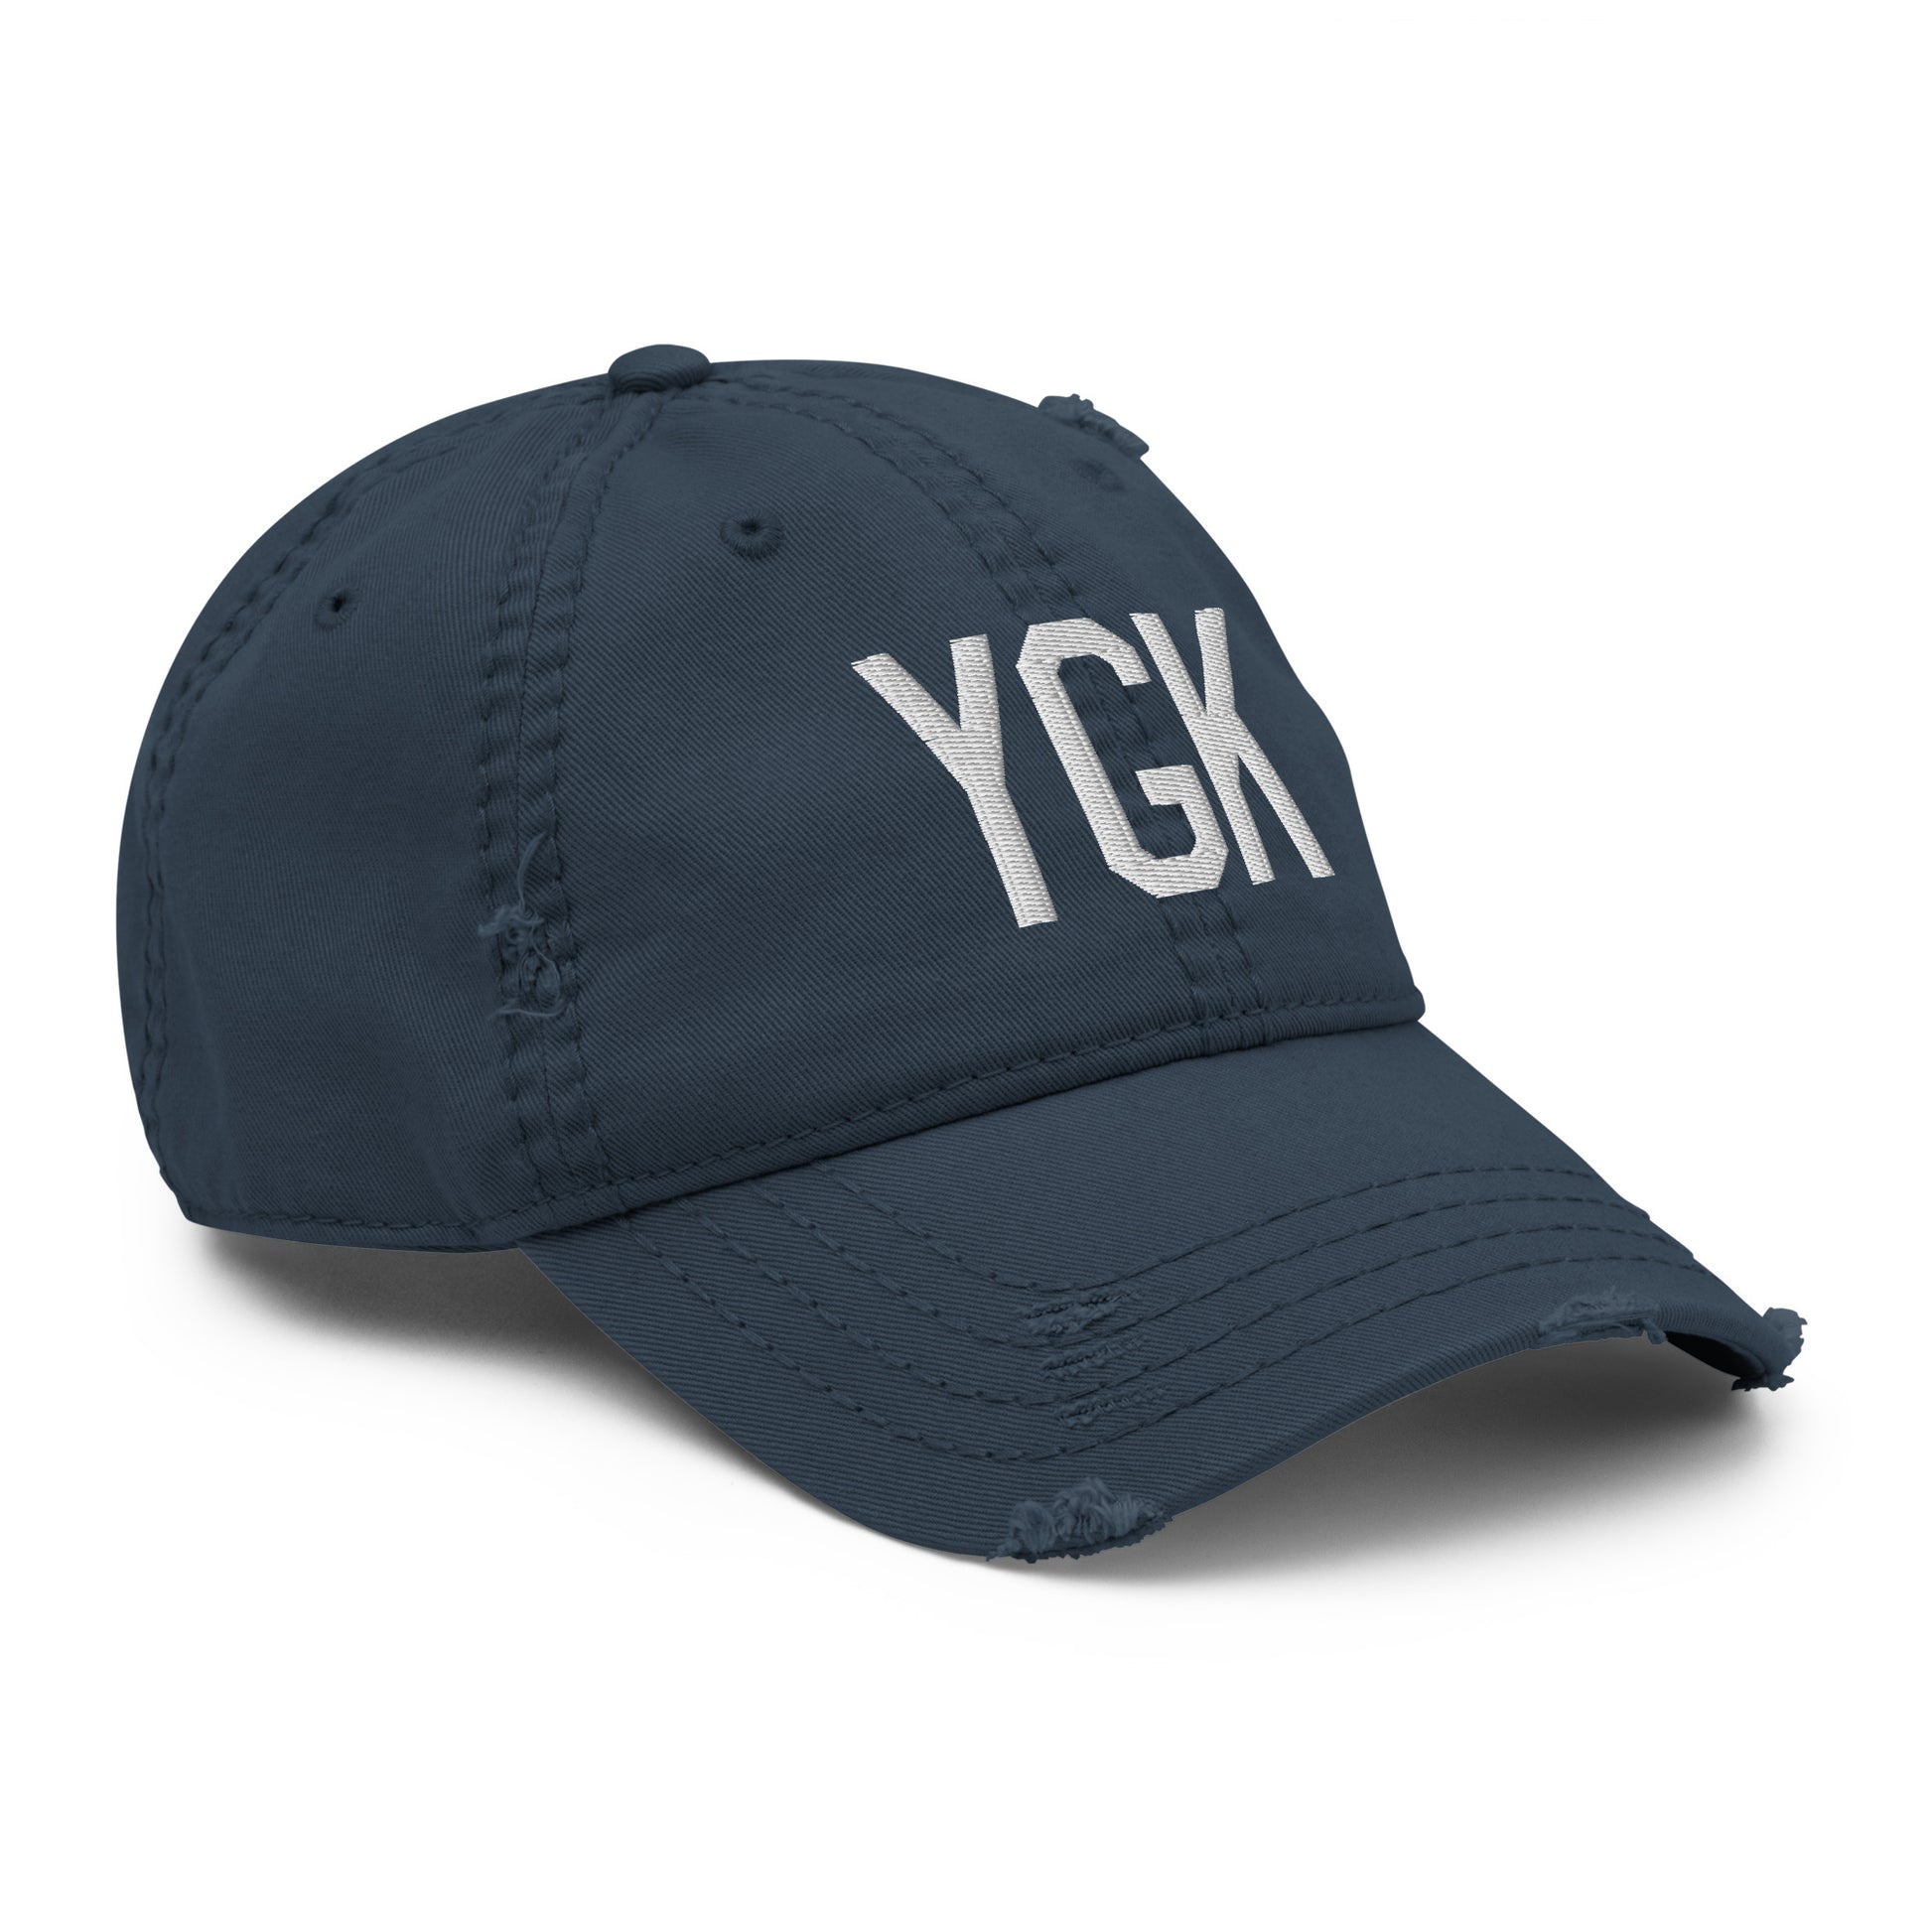 Airport Code Distressed Hat - White • YGK Kingston • YHM Designs - Image 14